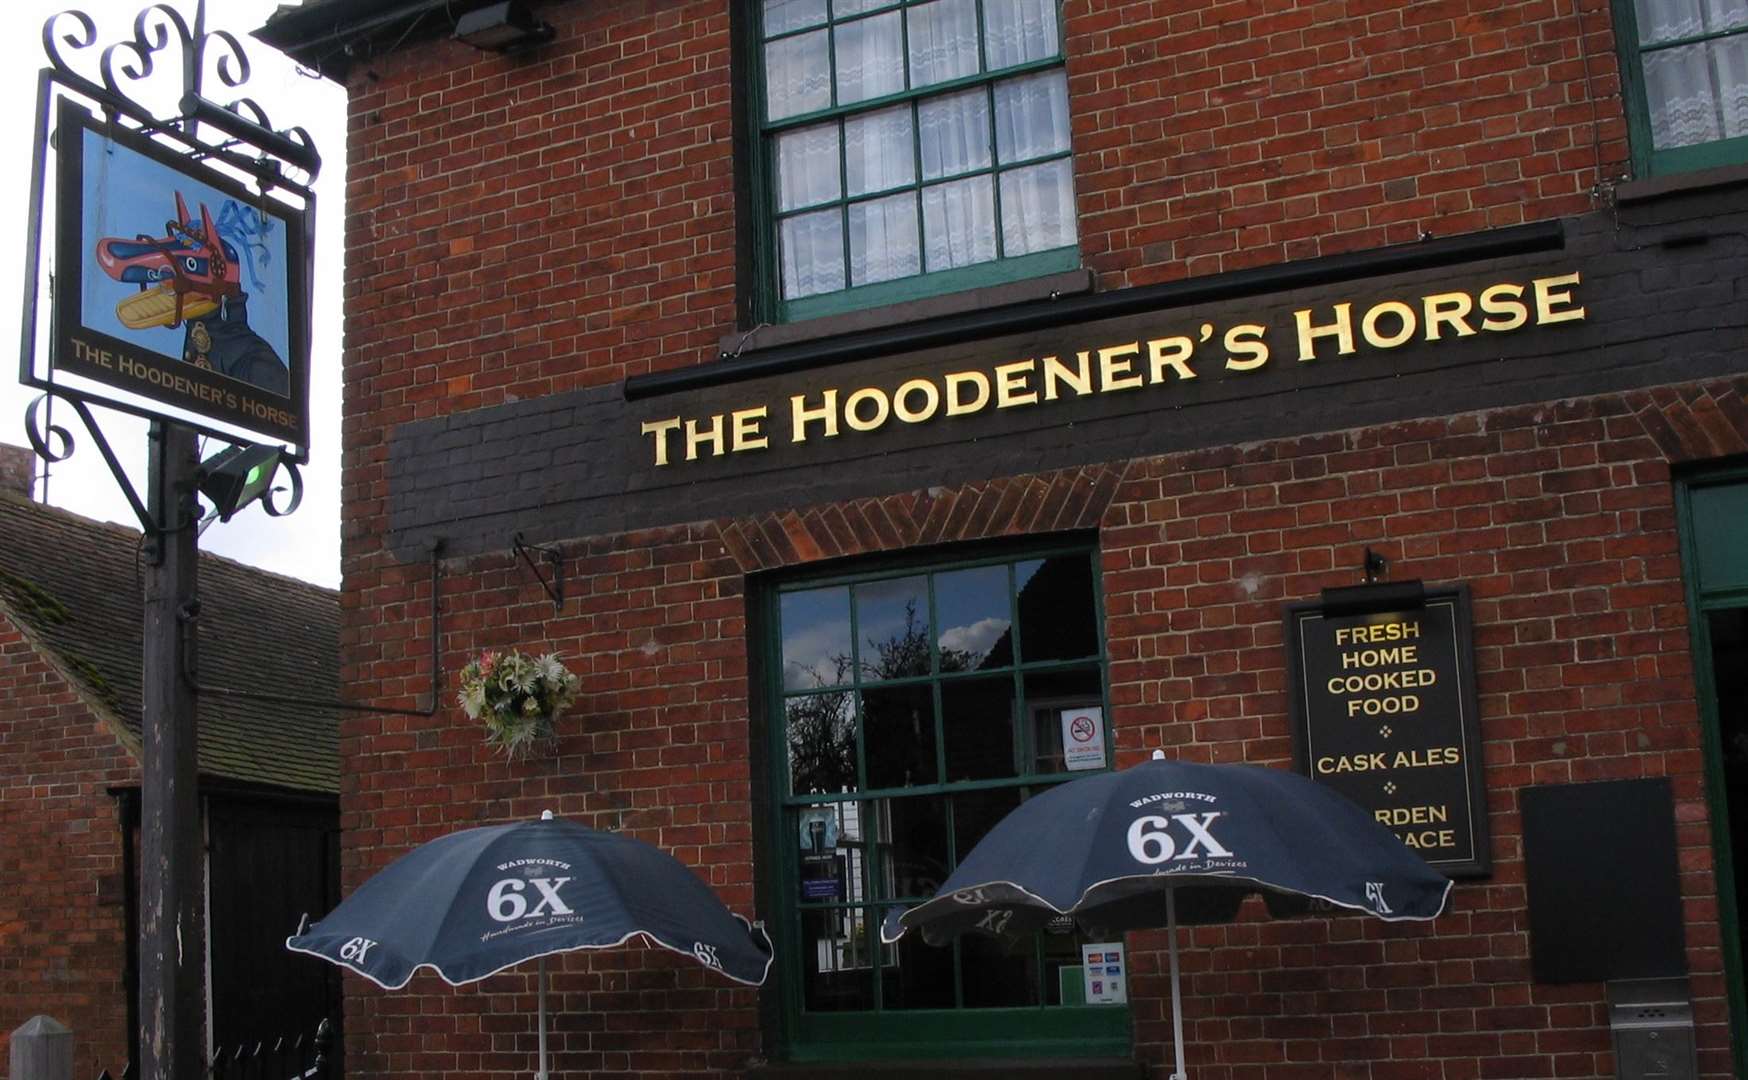 Alex Bensley's first Ashford pub was The Hooden Horse in Great Chart, which became the The Hoodener's Horse - pictured here in 2008 - and is now The Little Black Dog